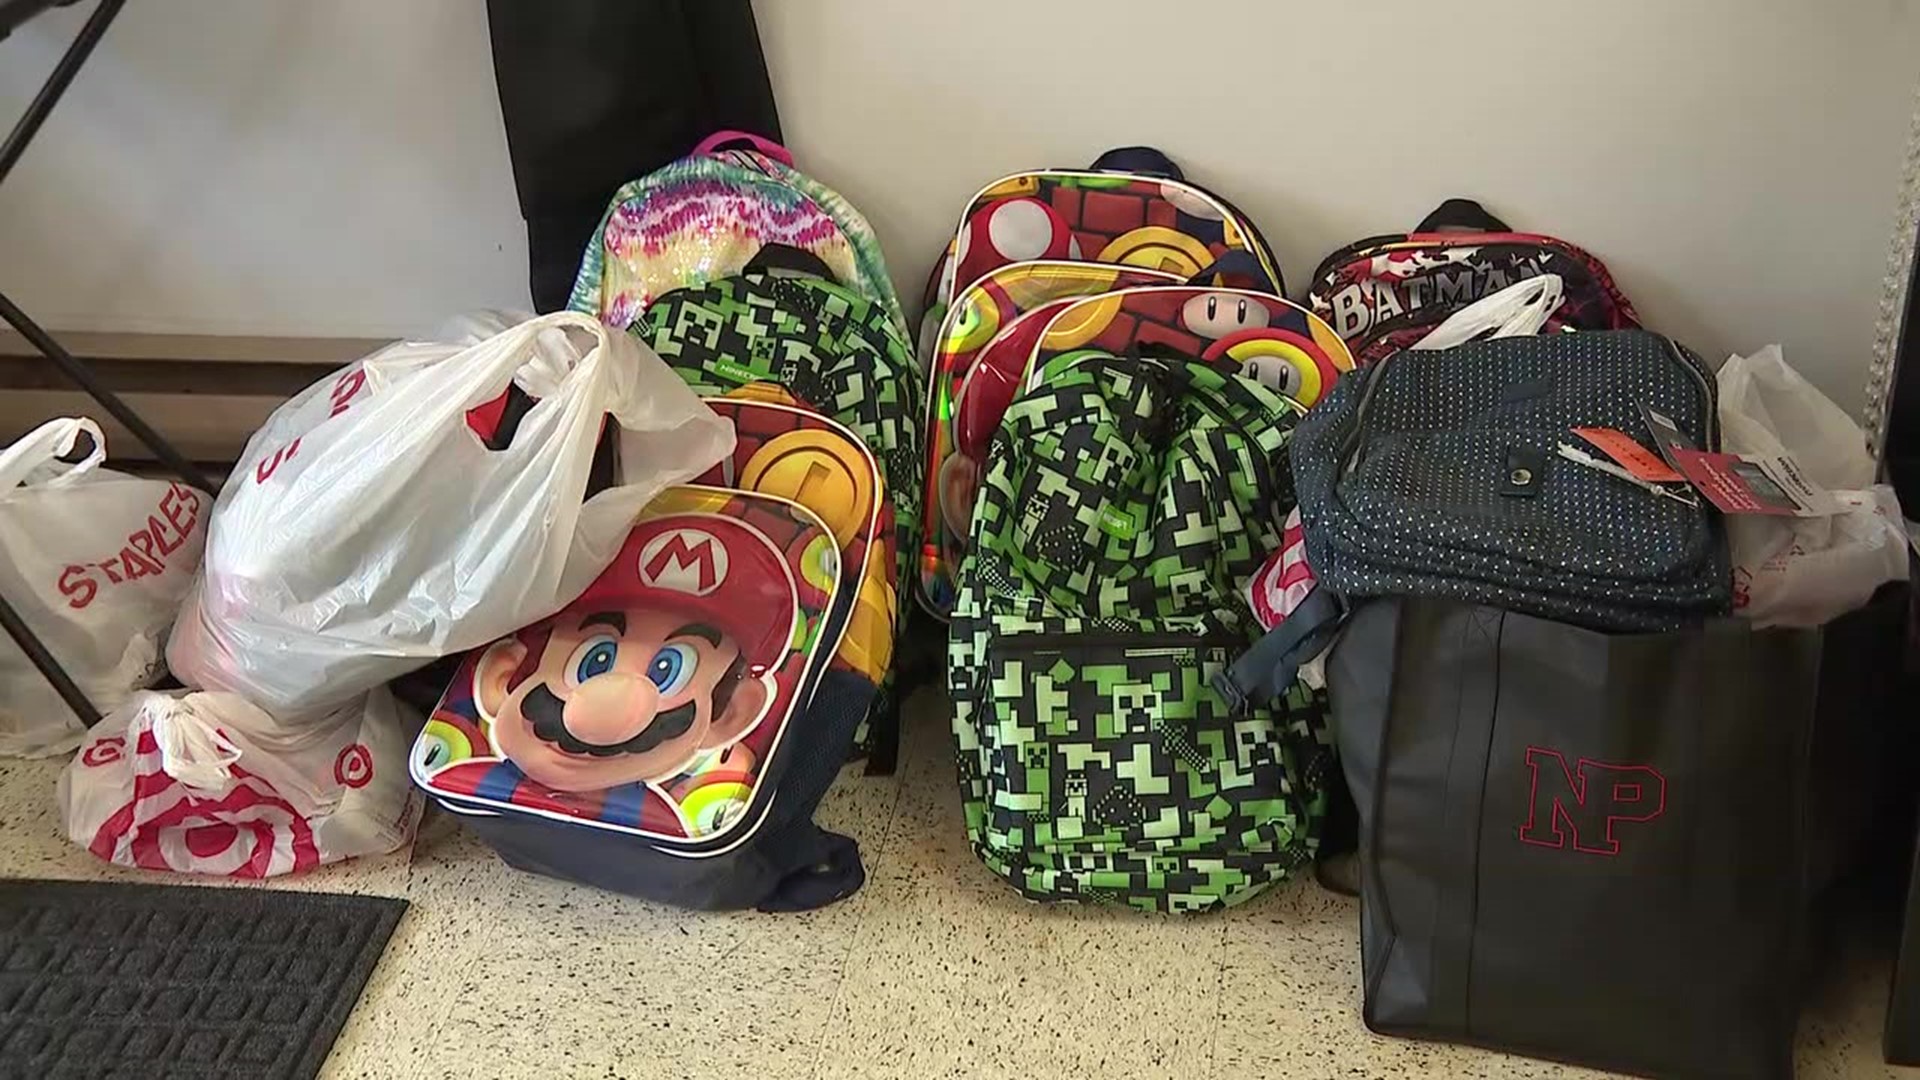 All the collected school items will be given to students and teachers in the North Pocono School District.